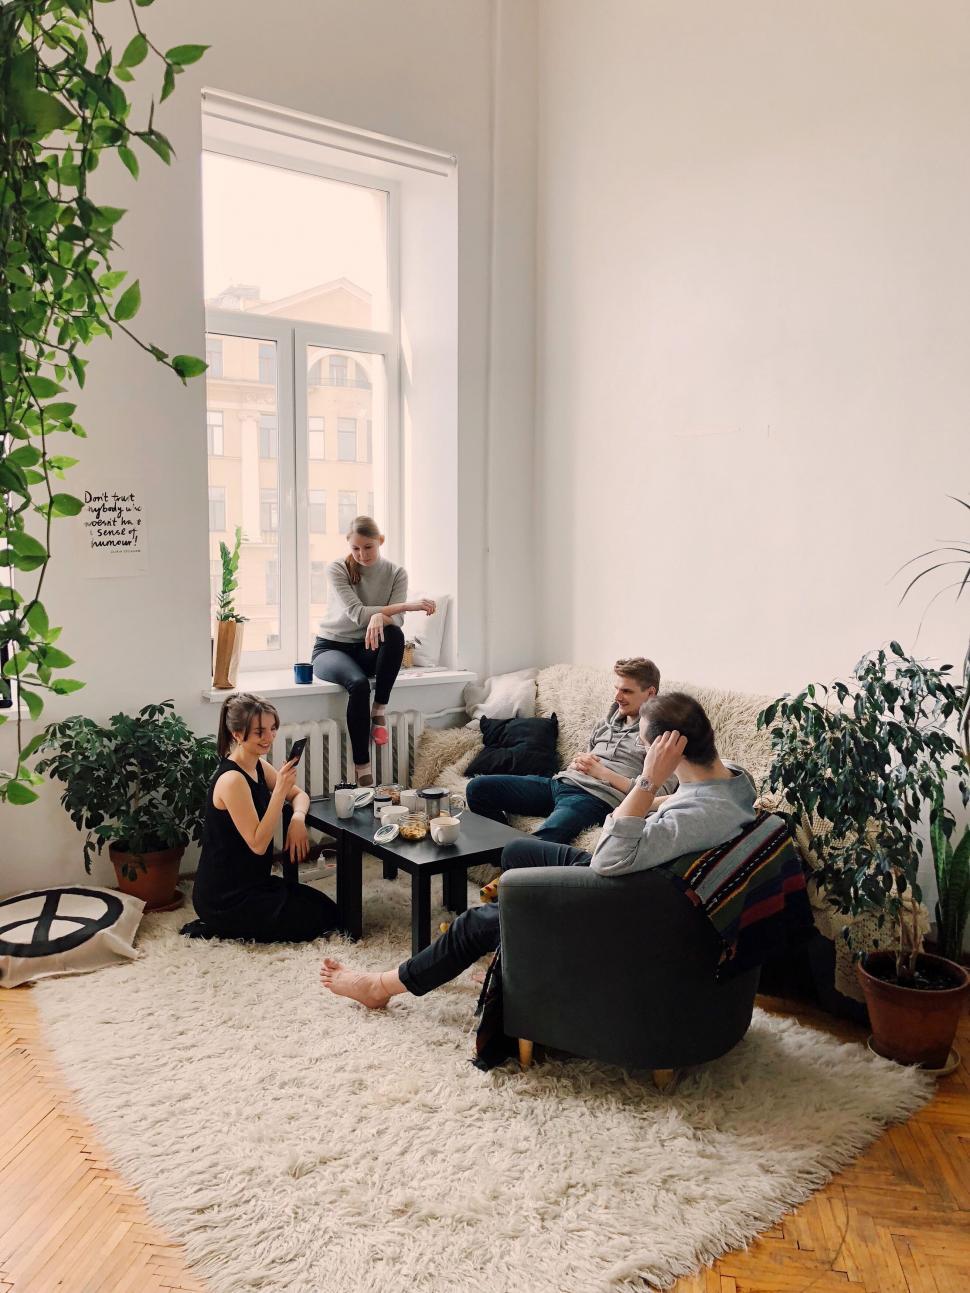 Free Image of Cozy living room scene with four friends 